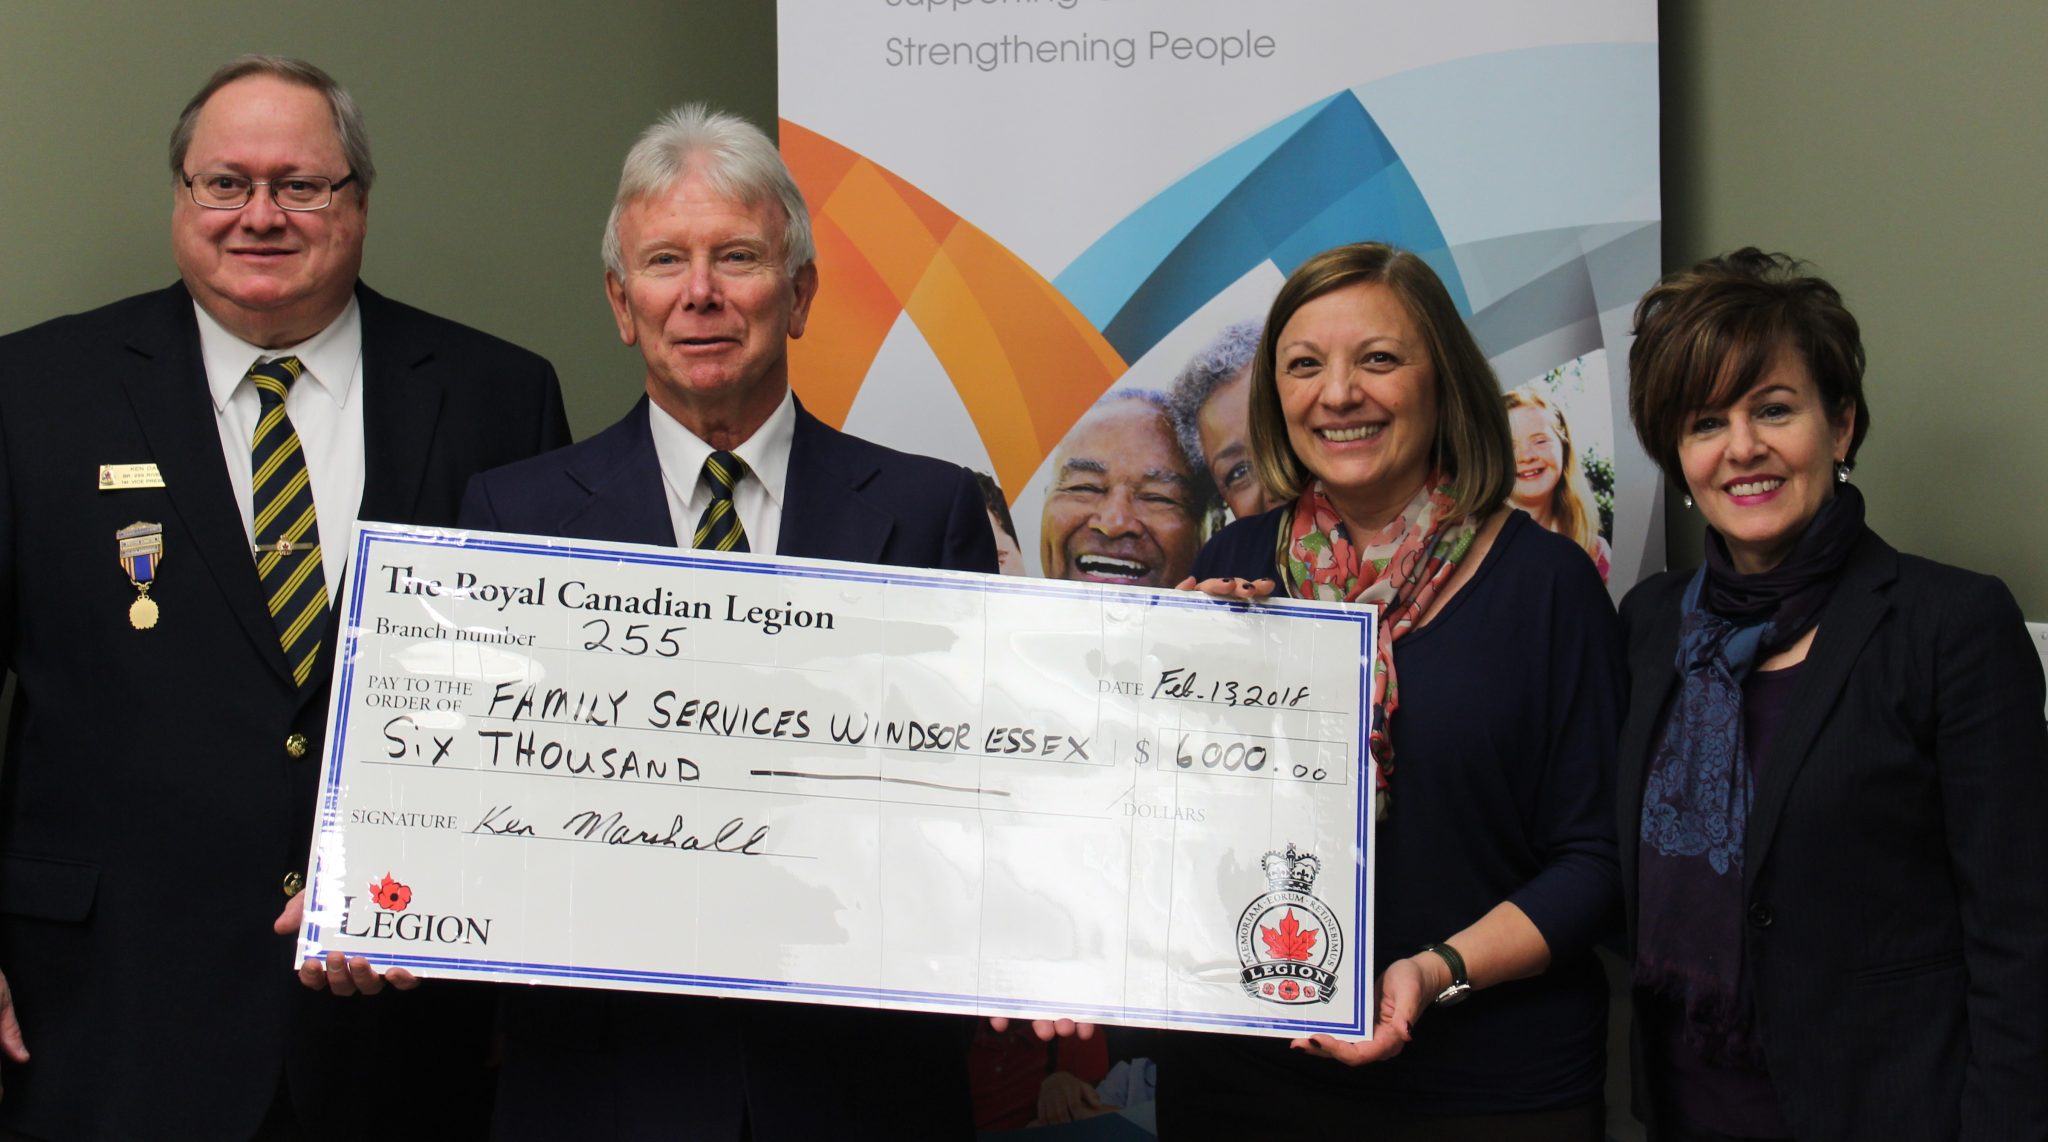 Royal Canadian Legion Members Ken Dault and Ken Marshall holding large $6,000 cheque with Joyce Zuk and Beth Anne Ternovan from Family Services Windsor Essex